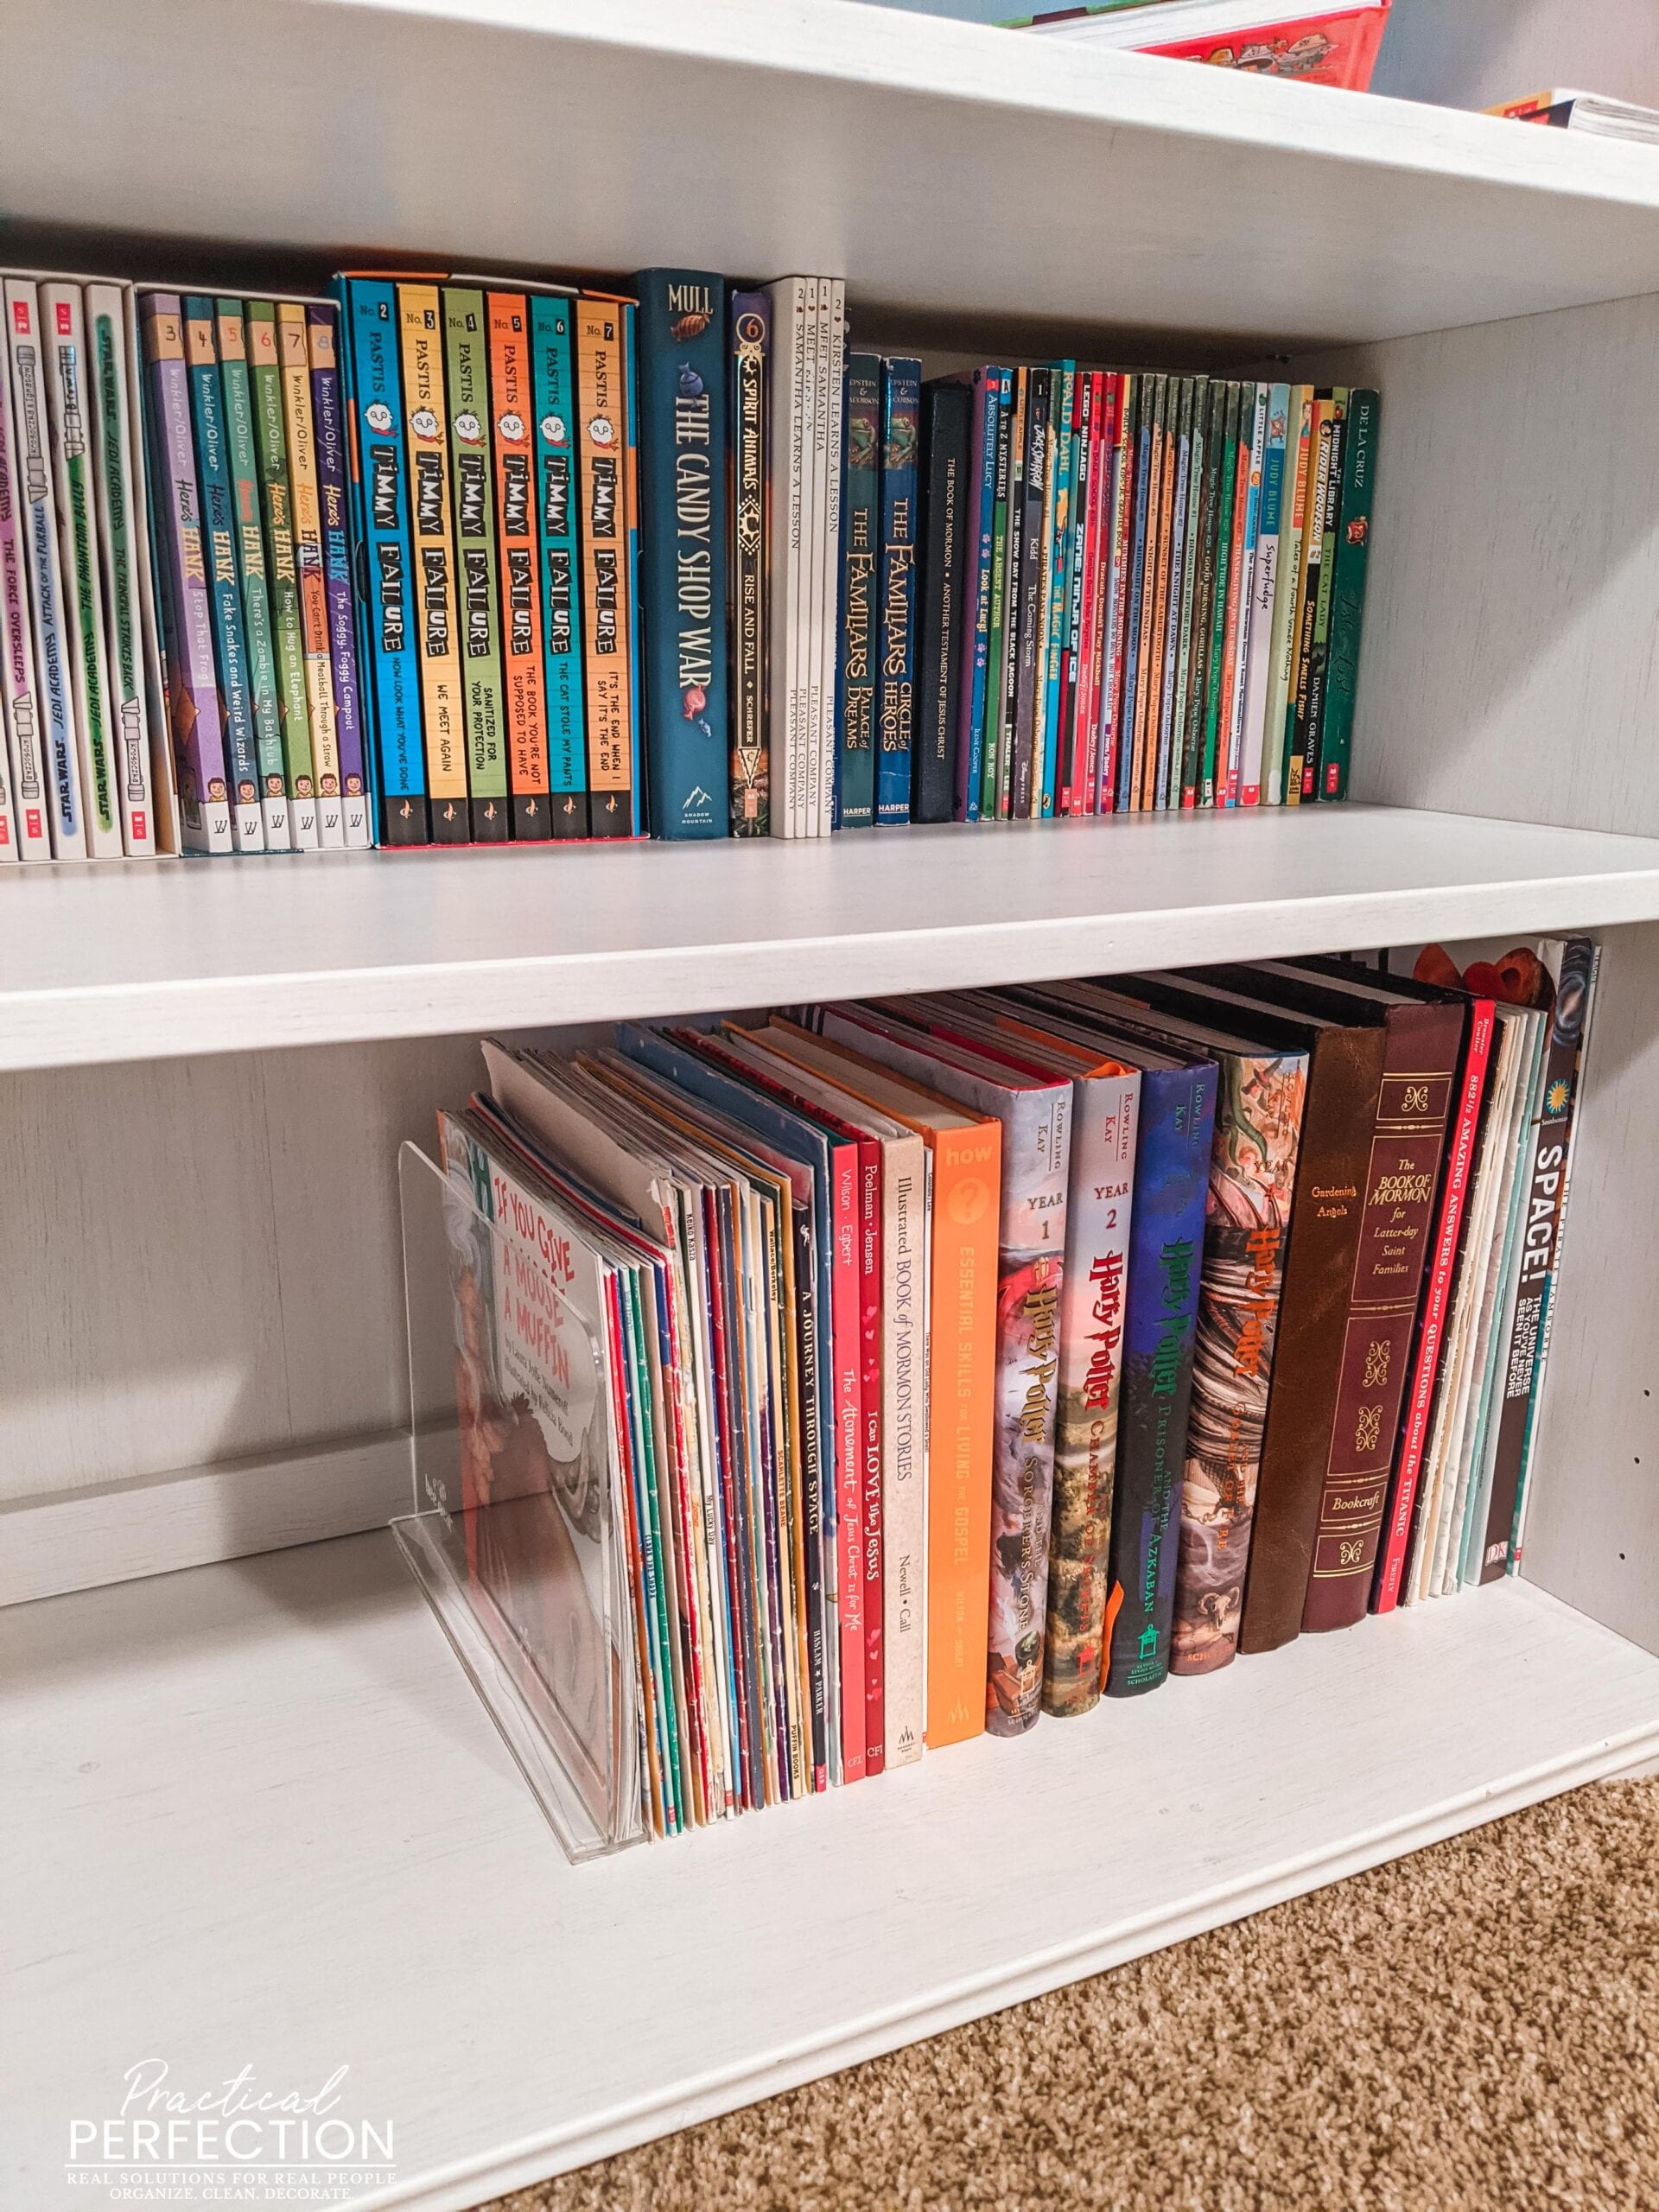 Acrylic Shelf Dividers - The Buy Guide